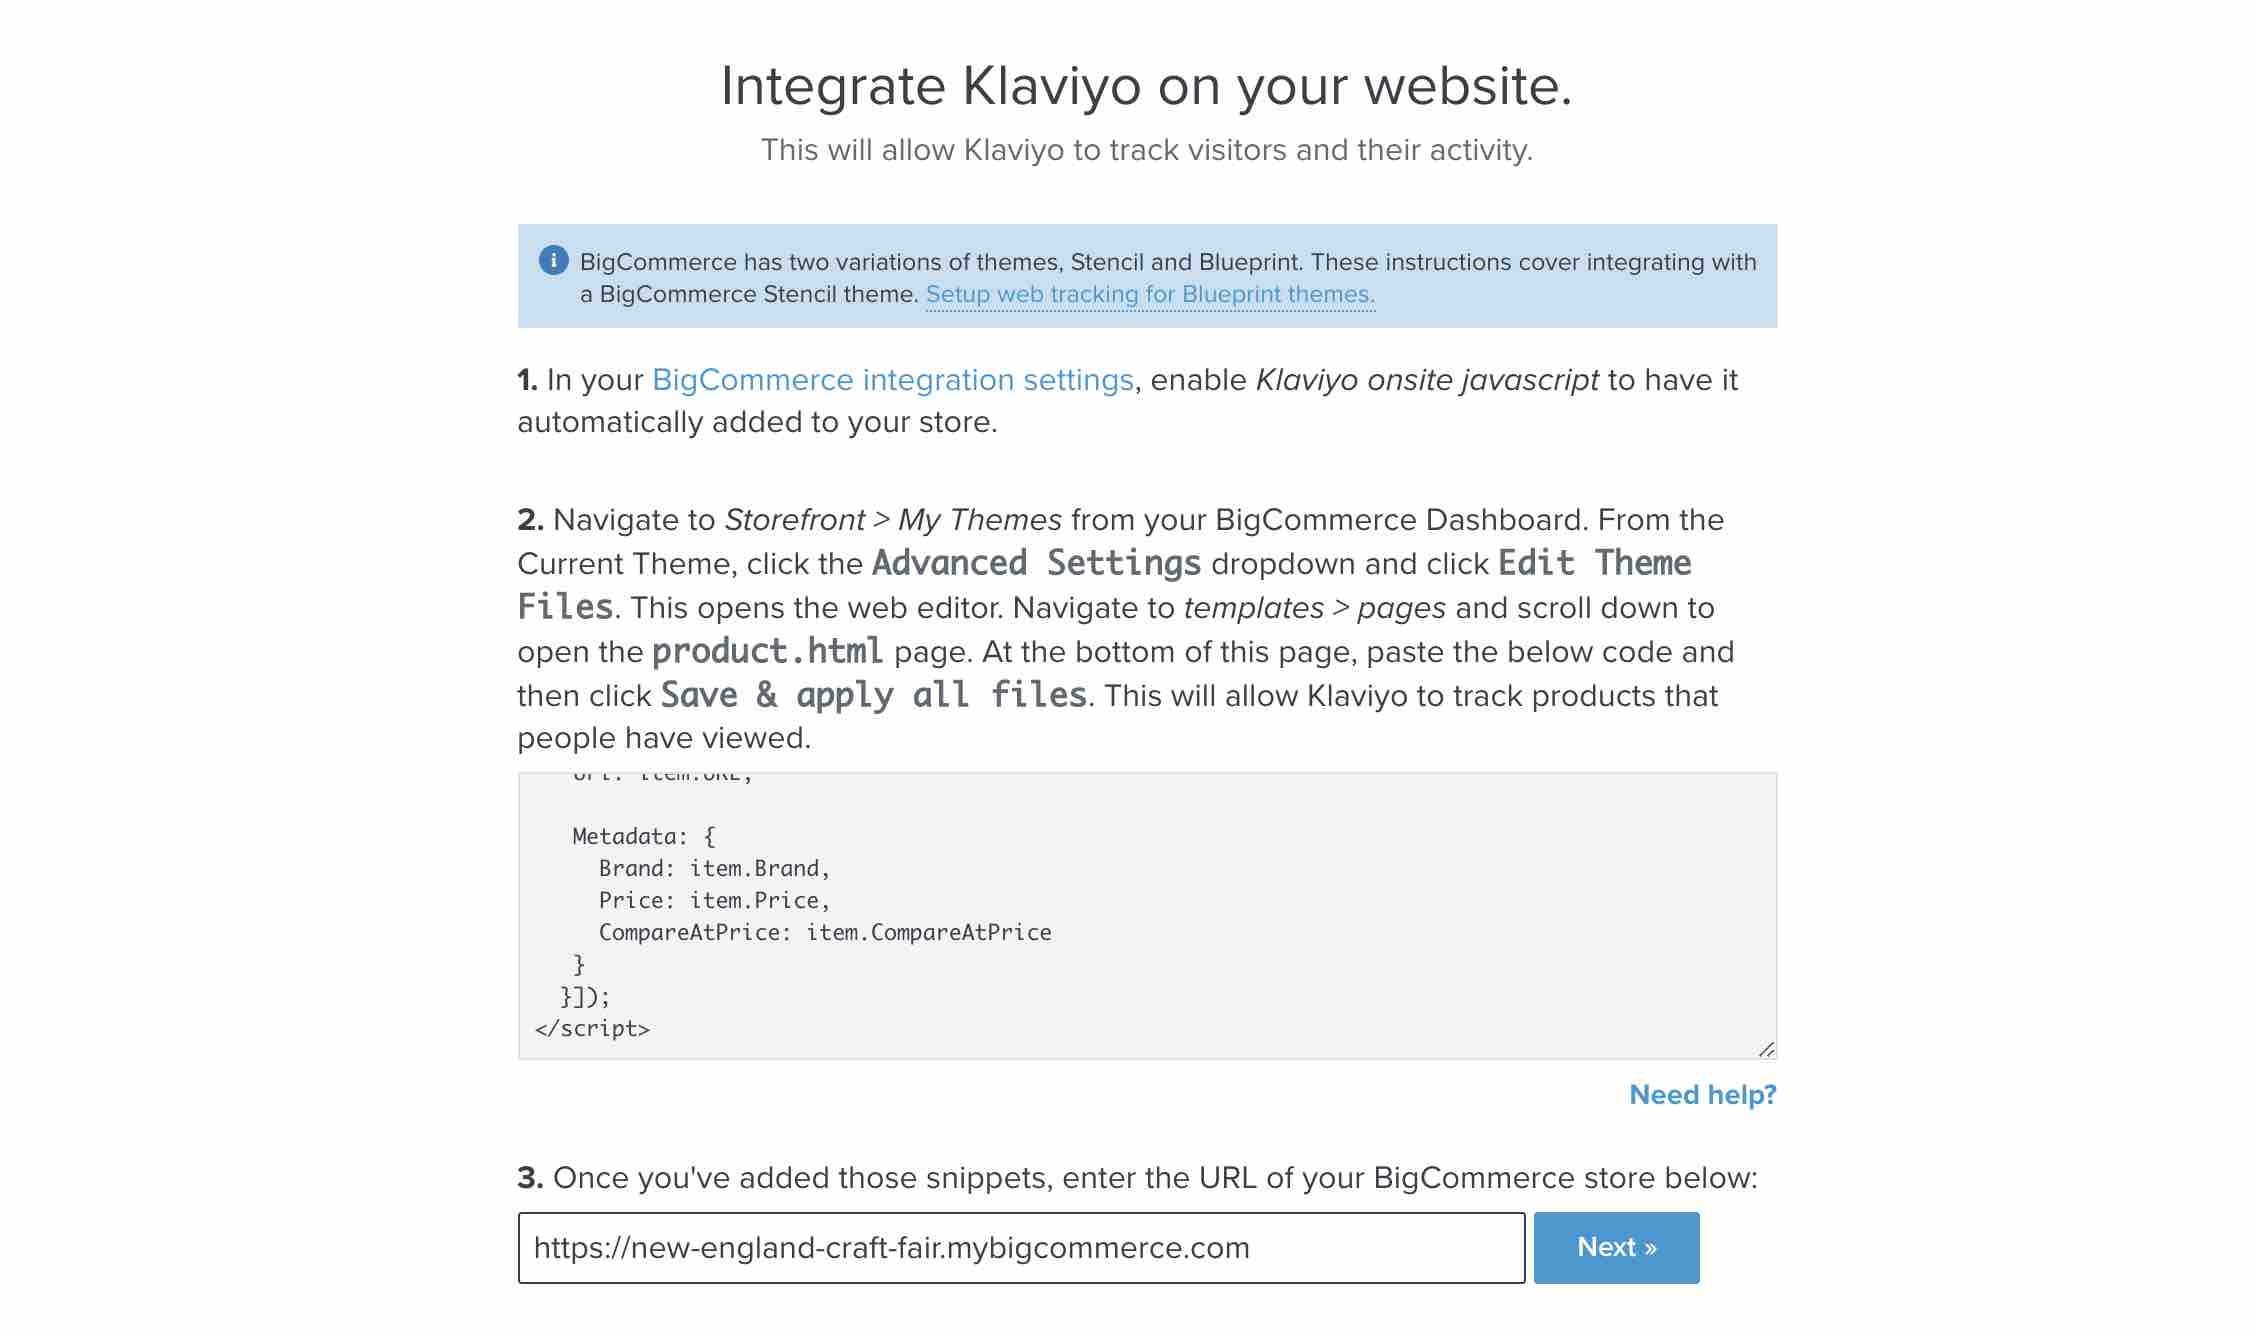 Setup web tracking page in Klaviyo showing three steps, third step has a text box filled with a BigCommerce store URL and Next with a blue background